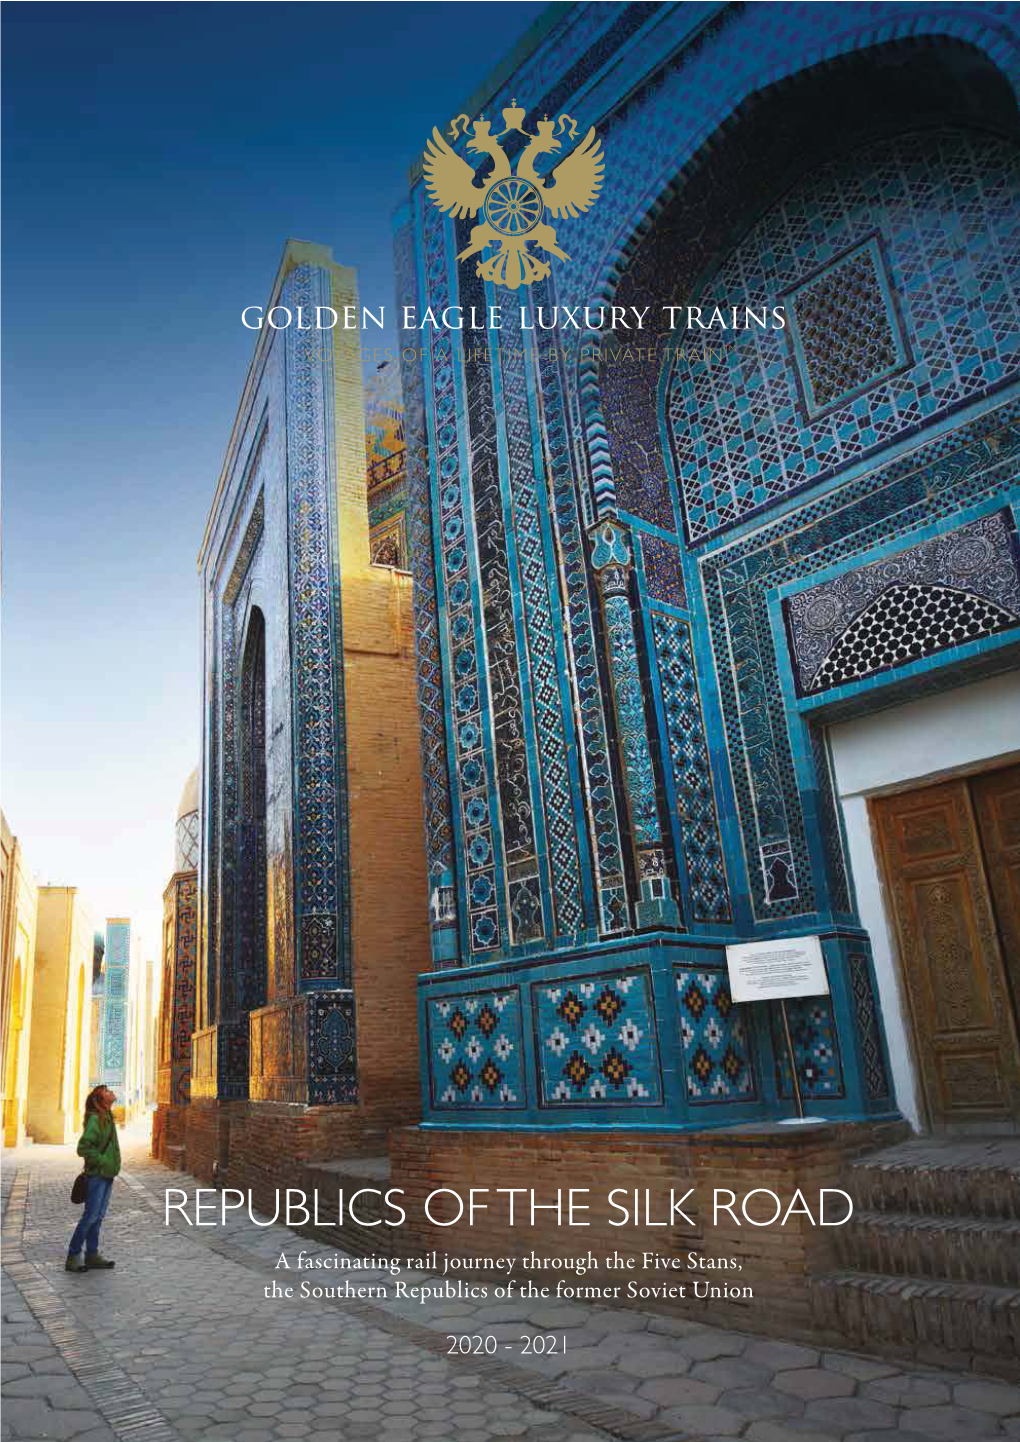 REPUBLICS of the SILK ROAD a Fascinating Rail Journey Through the Five Stans, the Southern Republics of the Former Soviet Union